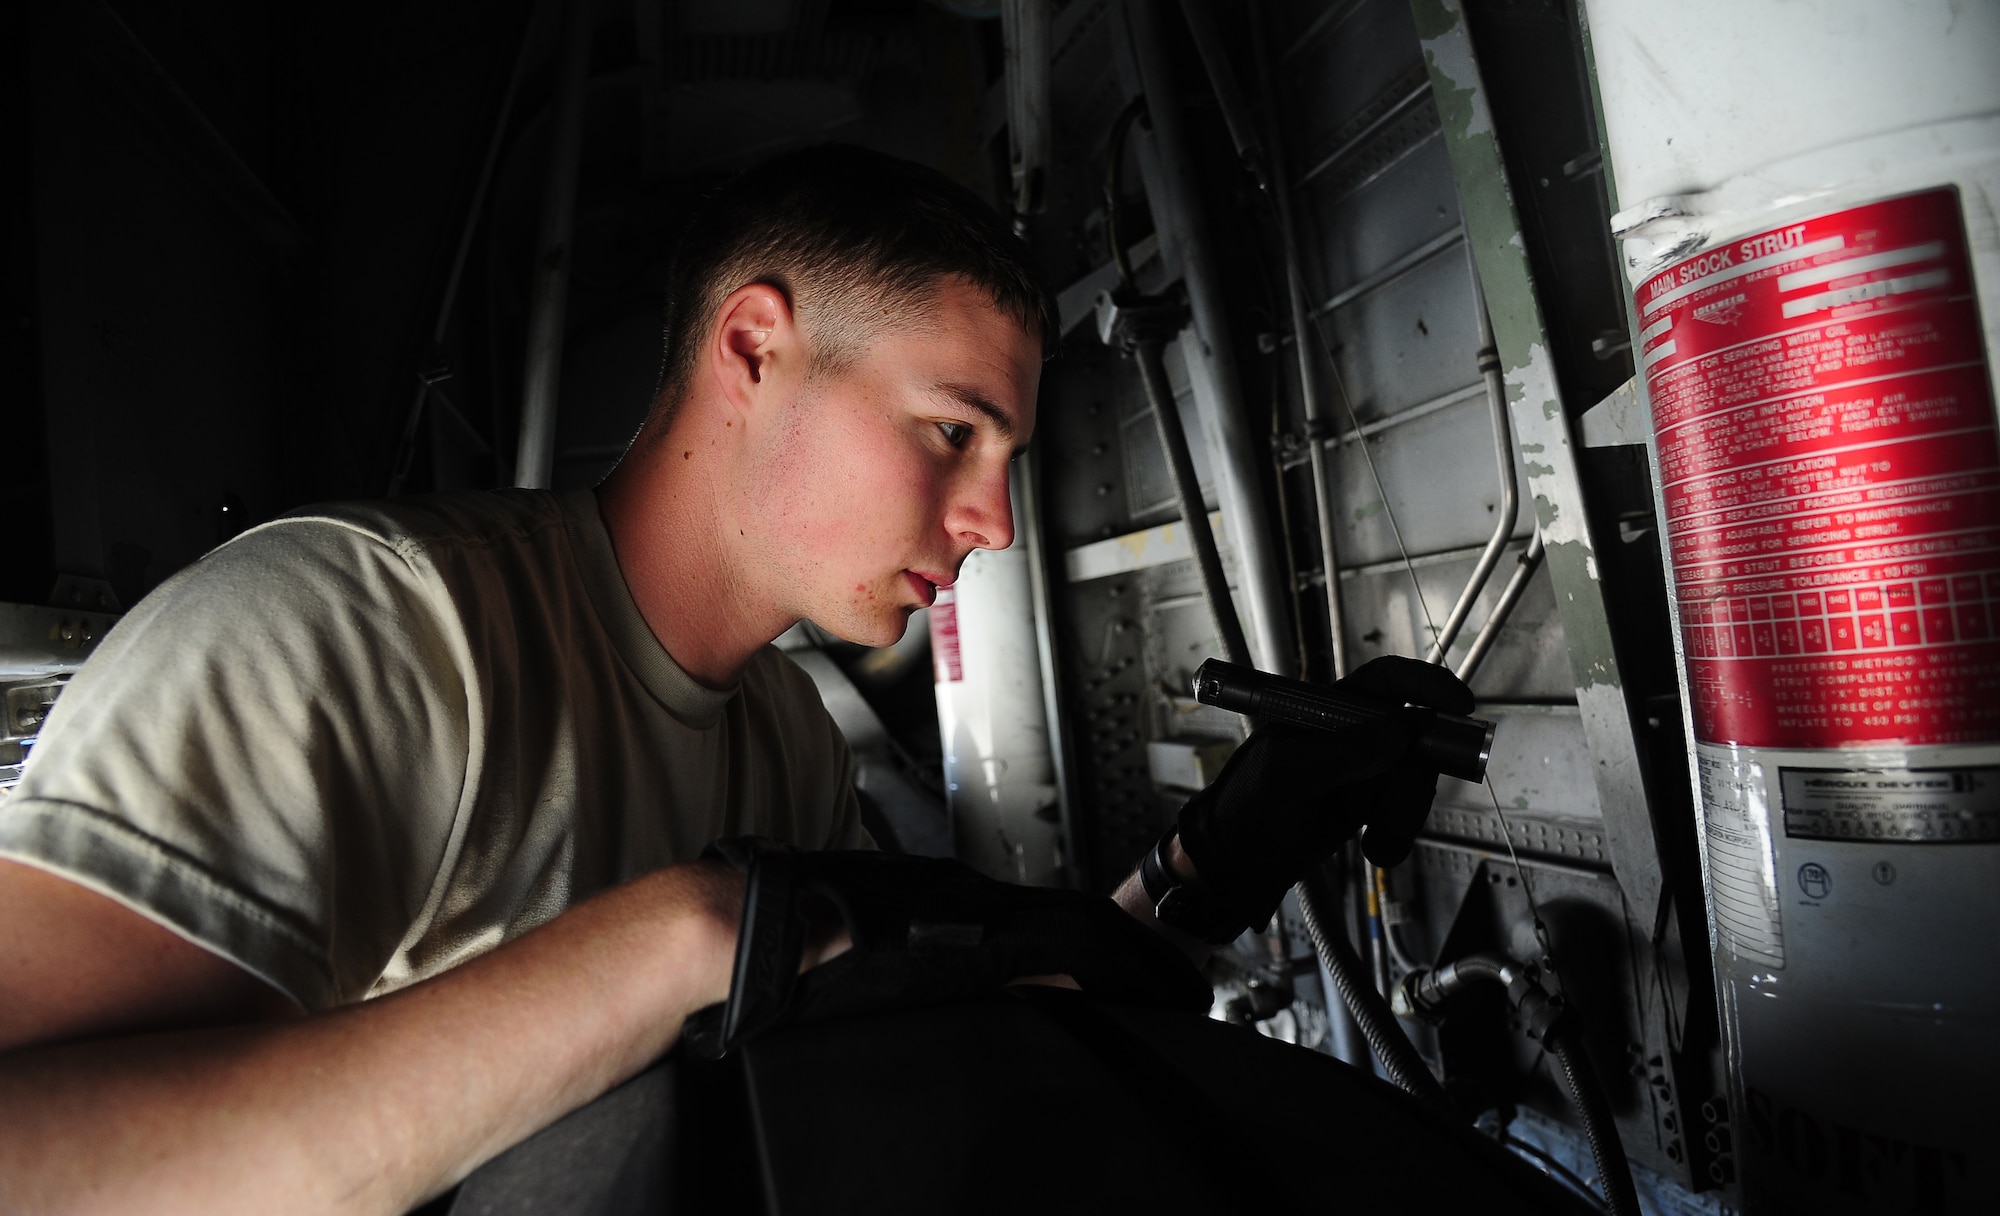 U.S. Air Force Senior Airman Beau Lewis, a crew chief with the 146th Aircraft Maintenance Squadron at Channel Islands Air National Guard Station, Calif., checks the tire gear of a C-130J Hercules during Exercise Eager Lion May 29, 2014, at an air base in northern Jordan. Having C-130s participate in Eager Lion gave other countries a chance to practice tactics with an aircraft they might not otherwise encounter.  (U.S. Air Force photo by Staff Sgt. Brigitte N. Brantley/Released)